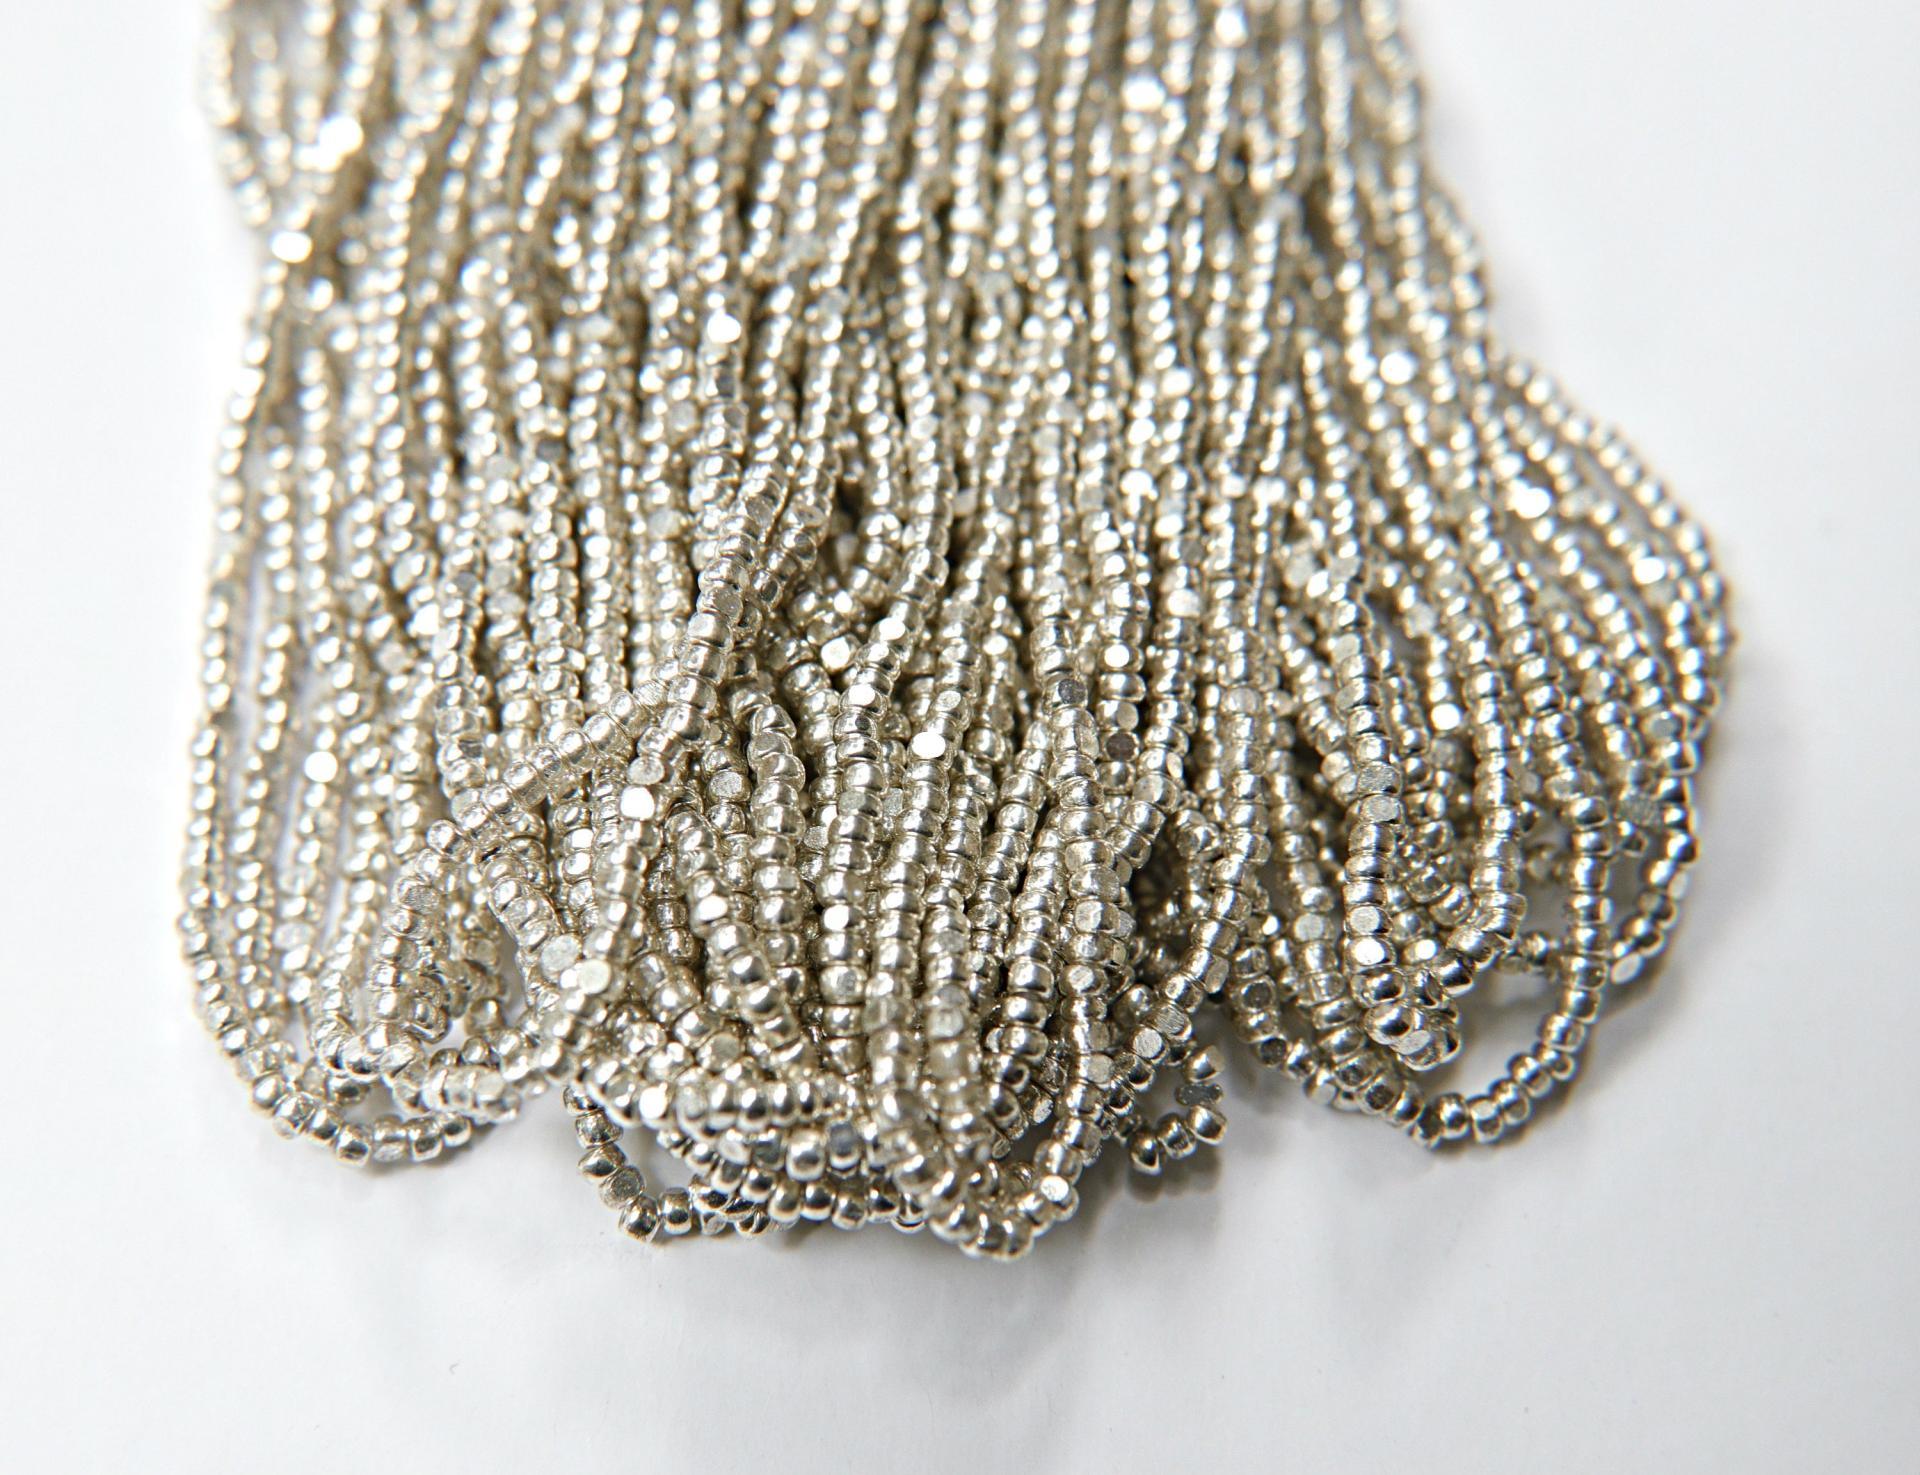 13/0 Charlotte Cut Beads Sterling Silver 5/10/20/50/250/500 Grams 1.6mm craft supplies, jewelry making, embroidery, vintage beads, rare bead